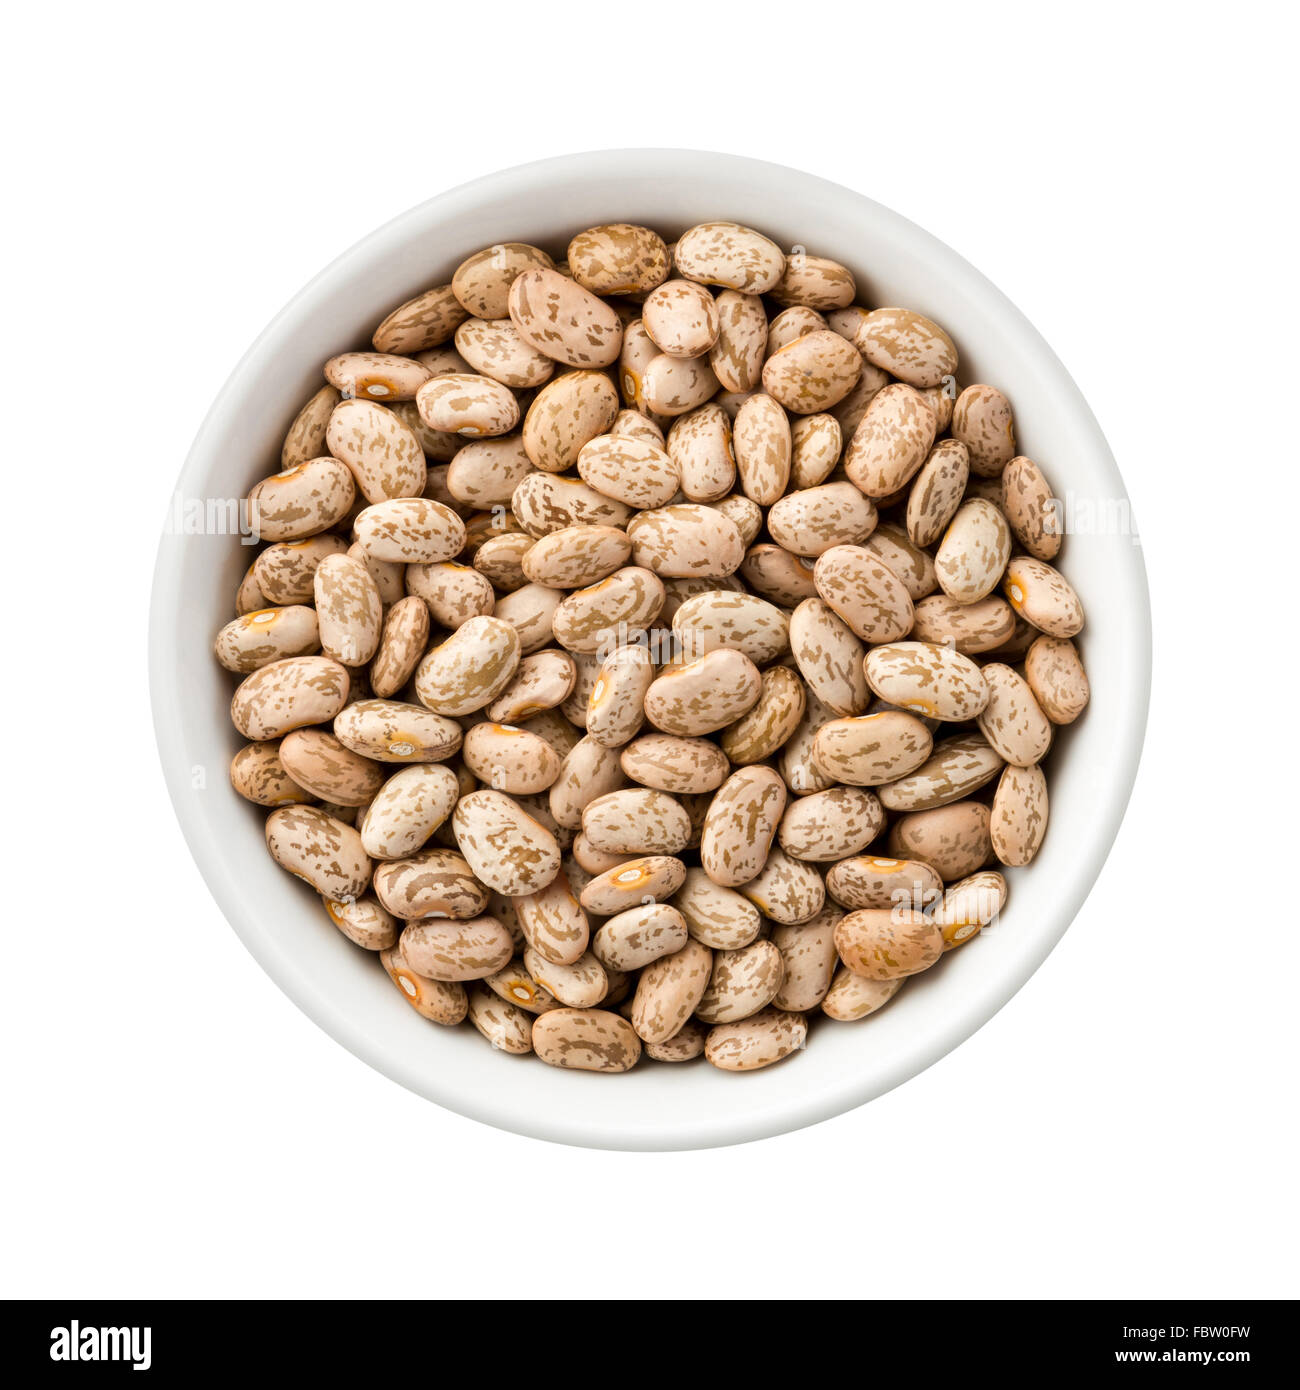 Overhead View of Pinto Beans in a Ceramic Bowl Stock Photo